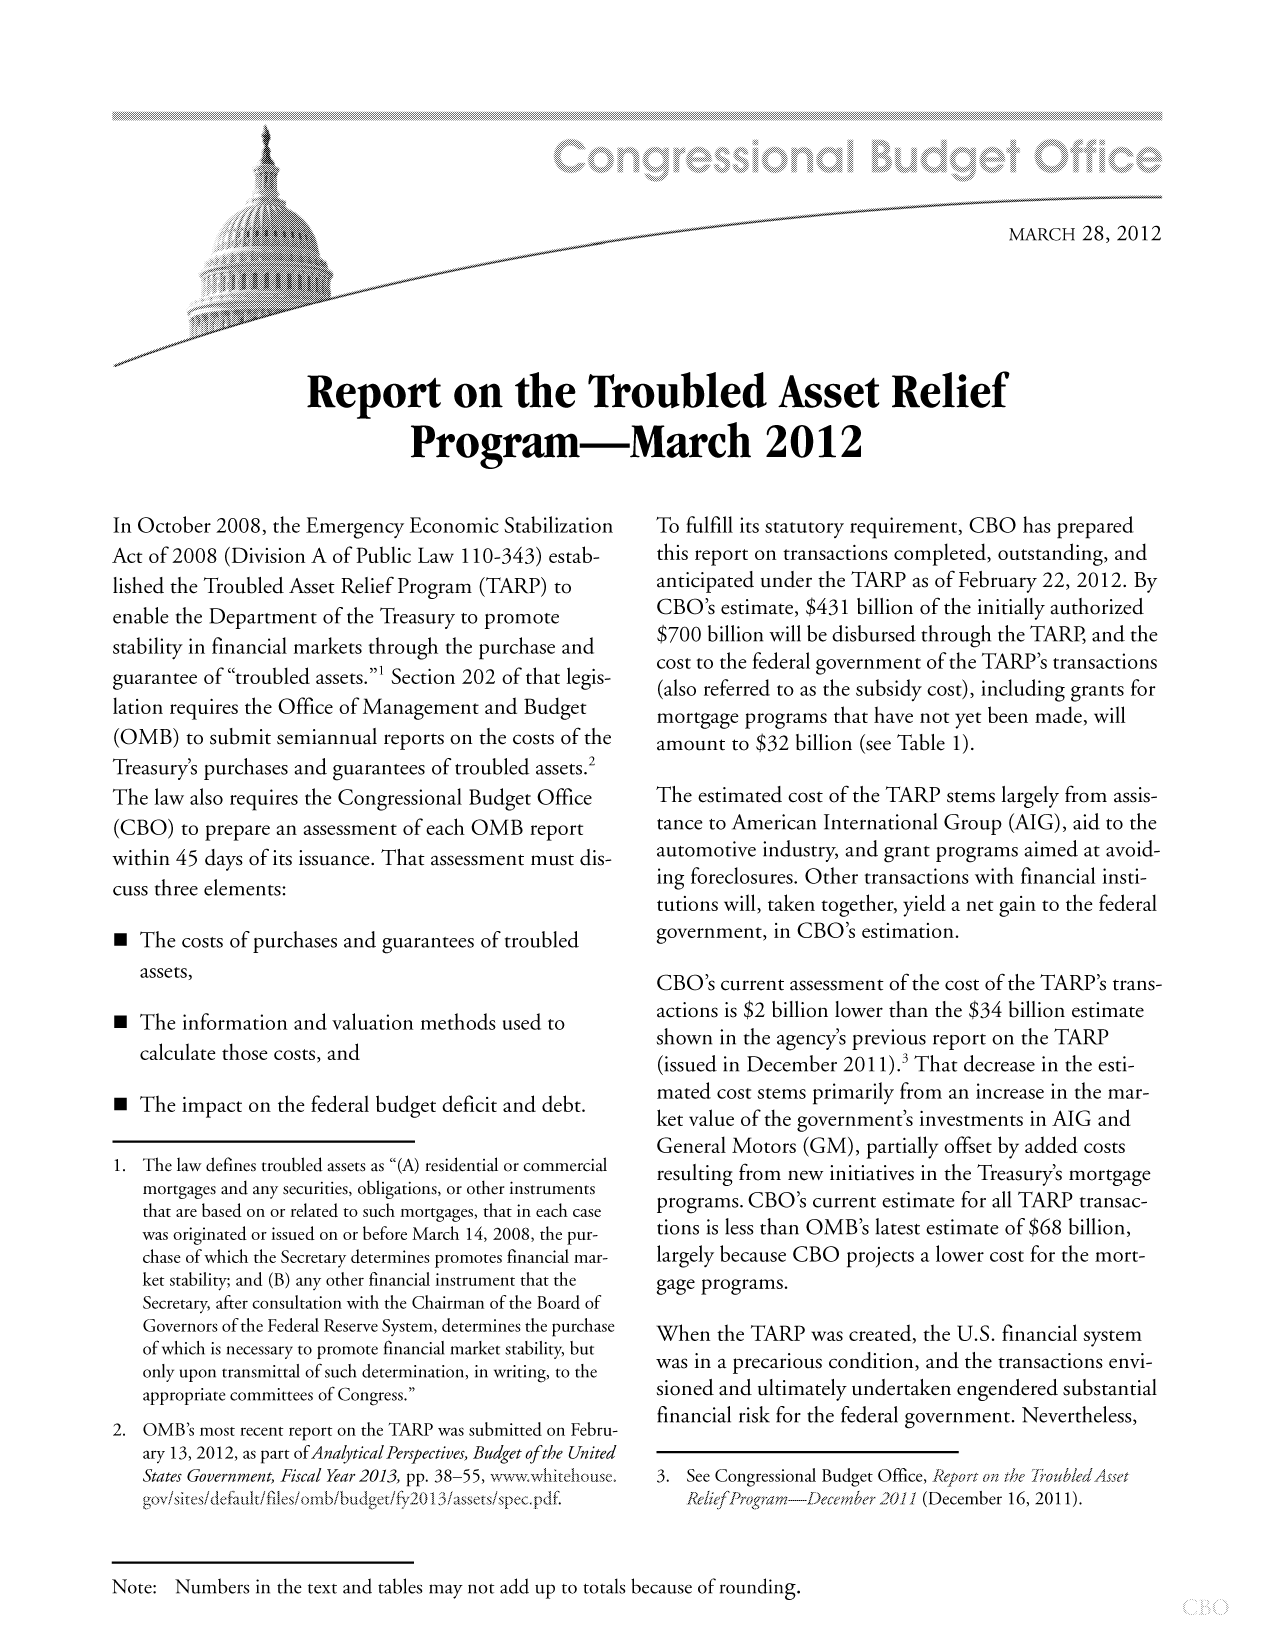 handle is hein.congrec/cbo10680 and id is 1 raw text is: MARCH 28, 2012
Report on the Troubled Asset Relief
Program-March 2012

In October 2008, the Emergency Economic Stabilization
Act of 2008 (Division A of Public Law 110-343) estab-
lished the Troubled Asset Relief Program (TARP) to
enable the Department of the Treasury to promote
stability in financial markets through the purchase and
guarantee of troubled assets.' Section 202 of that legis-
lation requires the Office of Management and Budget
(OMB) to submit semiannual reports on the costs of the
Treasury's purchases and guarantees of troubled assets.2
The law also requires the Congressional Budget Office
(CBO) to prepare an assessment of each OMB report
within 45 days of its issuance. That assessment must dis-
cuss three elements:
 The costs of purchases and guarantees of troubled
assets,
a The information and valuation methods used to
calculate those costs, and
a  The impact on the federal budget deficit and debt.
1. The law defines troubled assets as (A) residential or commercial
mortgages and any securities, obligations, or other instruments
that are based on or related to such mortgages, that in each case
was originated or issued on or before March 14, 2008, the pur-
chase of which the Secretary determines promotes financial mar-
ket stability; and (B) any other financial instrument that the
Secretary, after consultation with the Chairman of the Board of
Governors of the Federal Reserve System, determines the purchase
of which is necessary to promote financial market stability, but
only upon transmittal of such determination, in writing, to the
appropriate committees of Congress.
2. OMB's most recent report on the TARP was submitted on Febru-
ary 13, 2012, as part of Analytical Perspectives, Budget ofthe United
States Government, Fiscal Year 2013, pp. 38-55, wvwwhitehouse.
gov/sites/default/files/omb/budget/f20 I 3/assets/spec.pdf.

To fulfill its statutory requirement, CBO has prepared
this report on transactions completed, outstanding, and
anticipated under the TARP as of February 22, 2012. By
CBO's estimate, $431 billion of the initially authorized
$700 billion will be disbursed through the TARP, and the
cost to the federal government of the TARP's transactions
(also referred to as the subsidy cost), including grants for
mortgage programs that have not yet been made, will
amount to $32 billion (see Table 1).
The estimated cost of the TARP stems largely from assis-
tance to American International Group (AIG), aid to the
automotive industry, and grant programs aimed at avoid-
ing foreclosures. Other transactions with financial insti-
tutions will, taken together, yield a net gain to the federal
government, in CBO's estimation.
CBO's current assessment of the cost of the TARP's trans-
actions is $2 billion lower than the $34 billion estimate
shown in the agency's previous report on the TARP
(issued in December 2011).3 That decrease in the esti-
mated cost stems primarily from an increase in the mar-
ket value of the government's investments in AIG and
General Motors (GM), partially offset by added costs
resulting from new initiatives in the Treasurys mortgage
programs. CBO's current estimate for all TARP transac-
tions is less than OMB's latest estimate of $68 billion,
largely because CBO projects a lower cost for the mort-
gage programs.
When the TARP was created, the U.S. financial system
was in a precarious condition, and the transactions envi-
sioned and ultimately undertaken engendered substantial
financial risk for the federal government. Nevertheless,
3. See Congressional Budget Office, Report on the 7roubledAsset
ReliefProgram-)ecember 2011 (December 16, 2011).

Note: Numbers in the text and tables may not add up to totals because of rounding.


